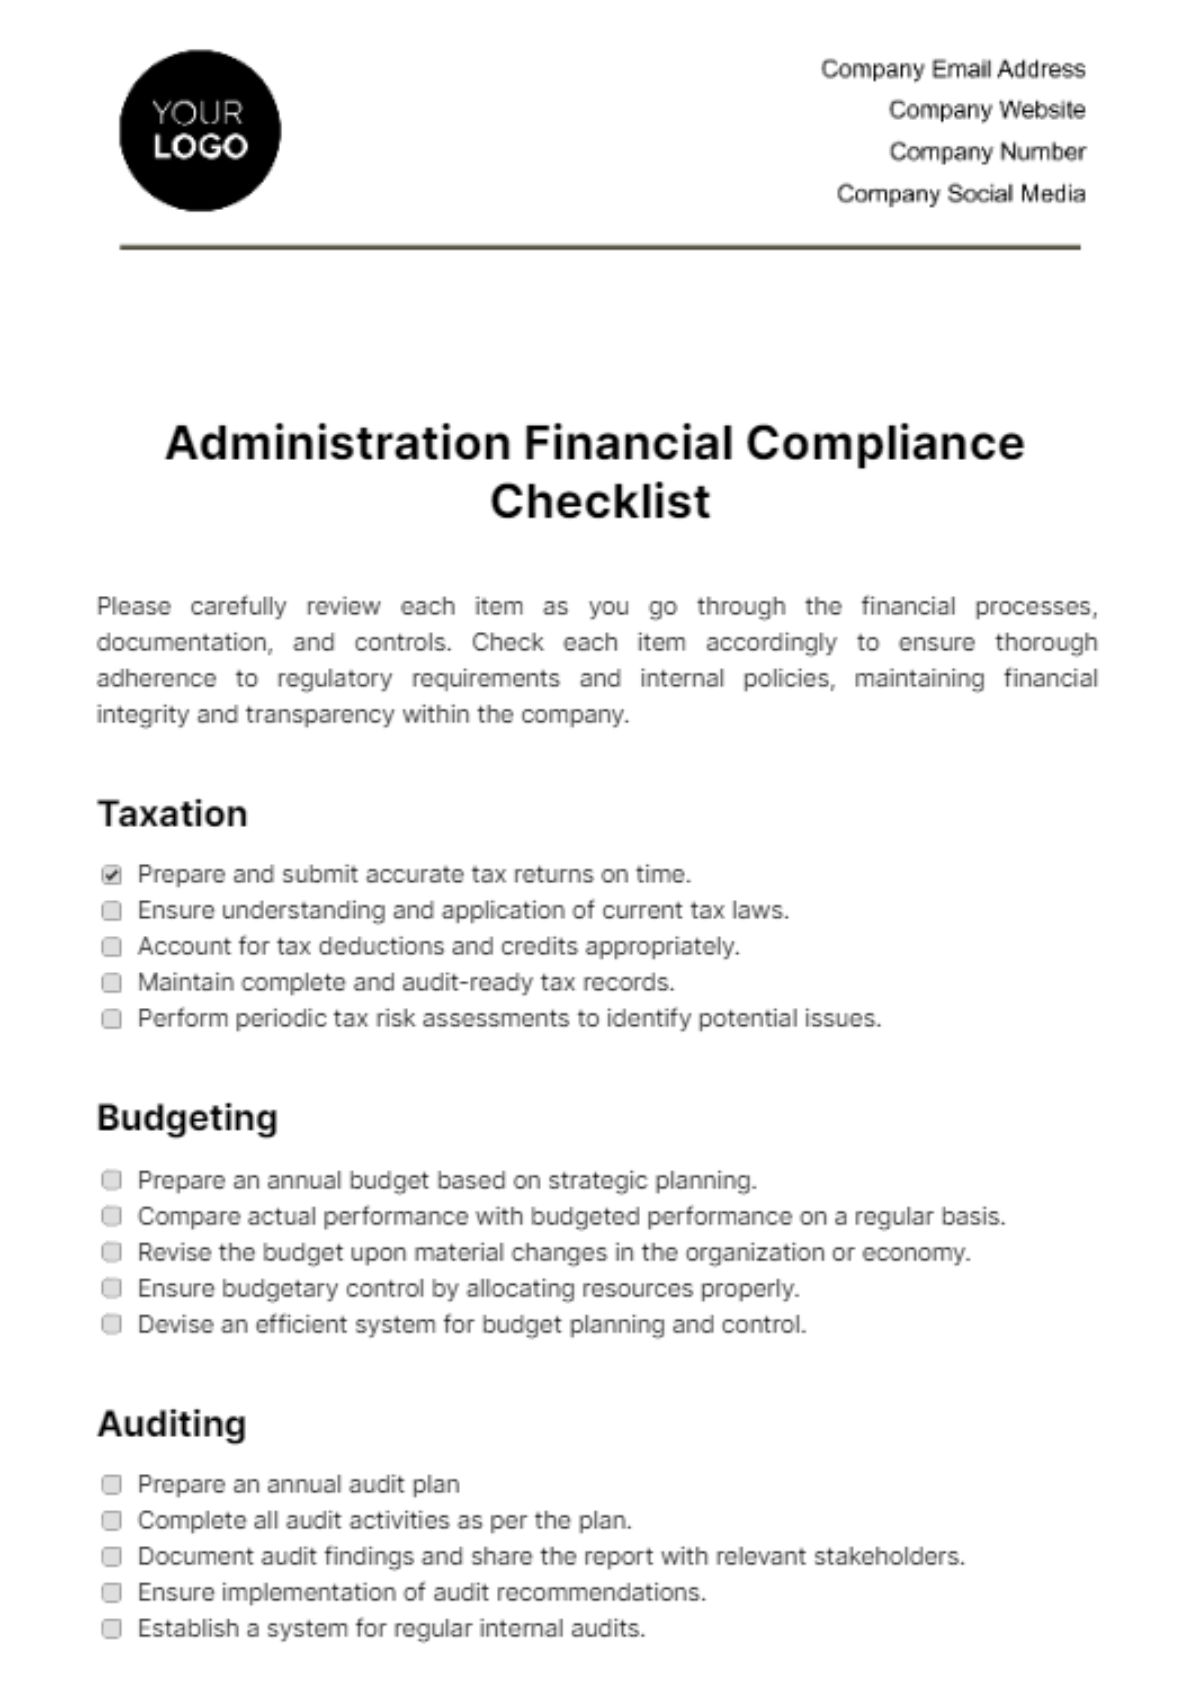 Free Administration Financial Compliance Checklist Template